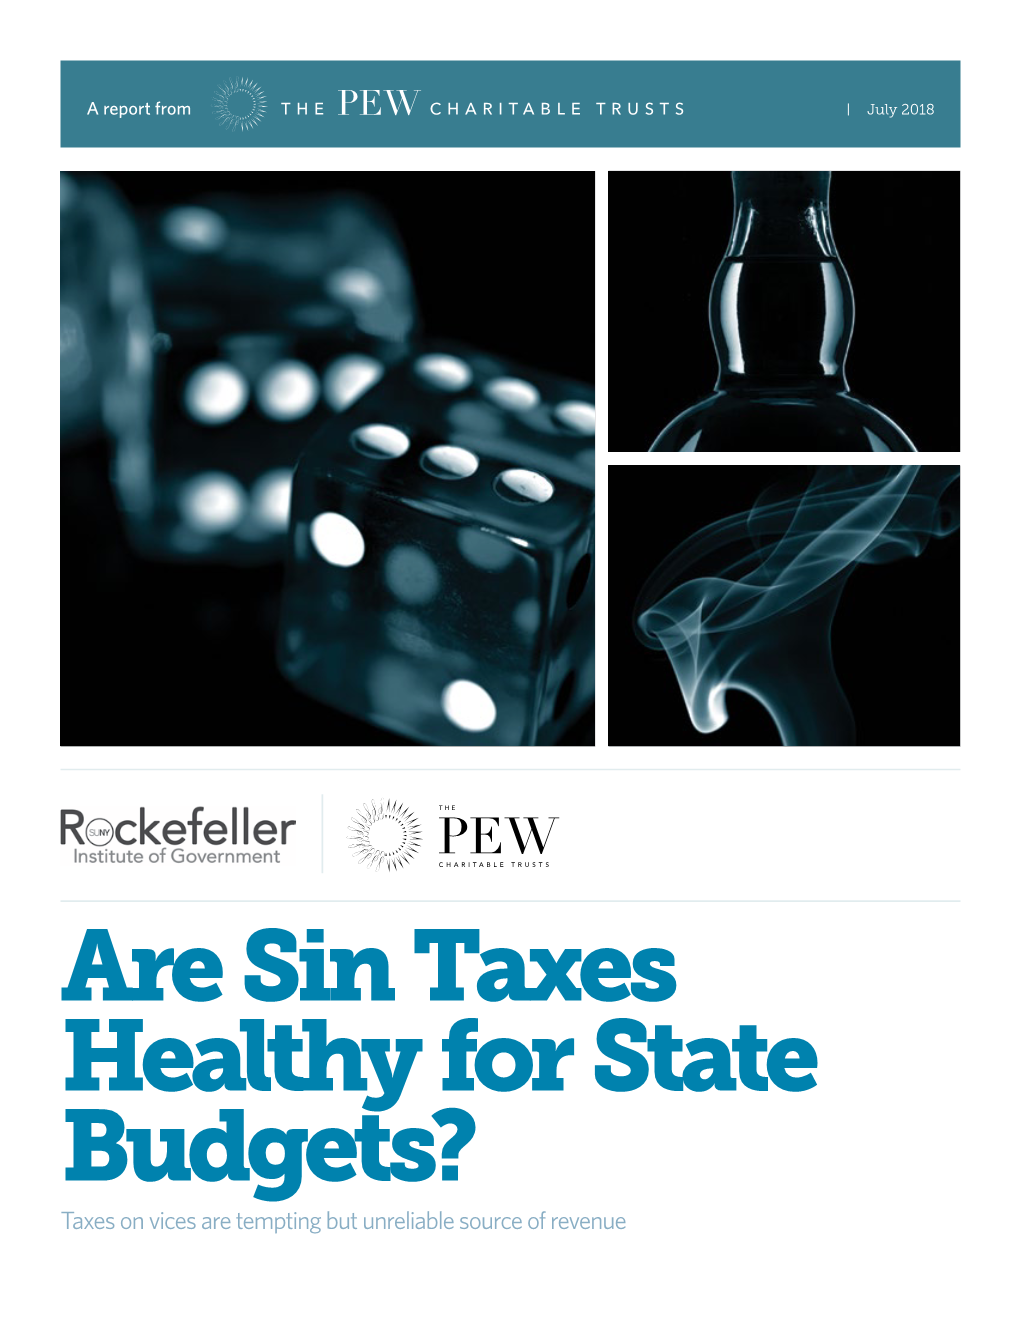 Are Sin Taxes Healthy for State Budgets? Taxes on Vices Are Tempting but Unreliable Source of Revenue